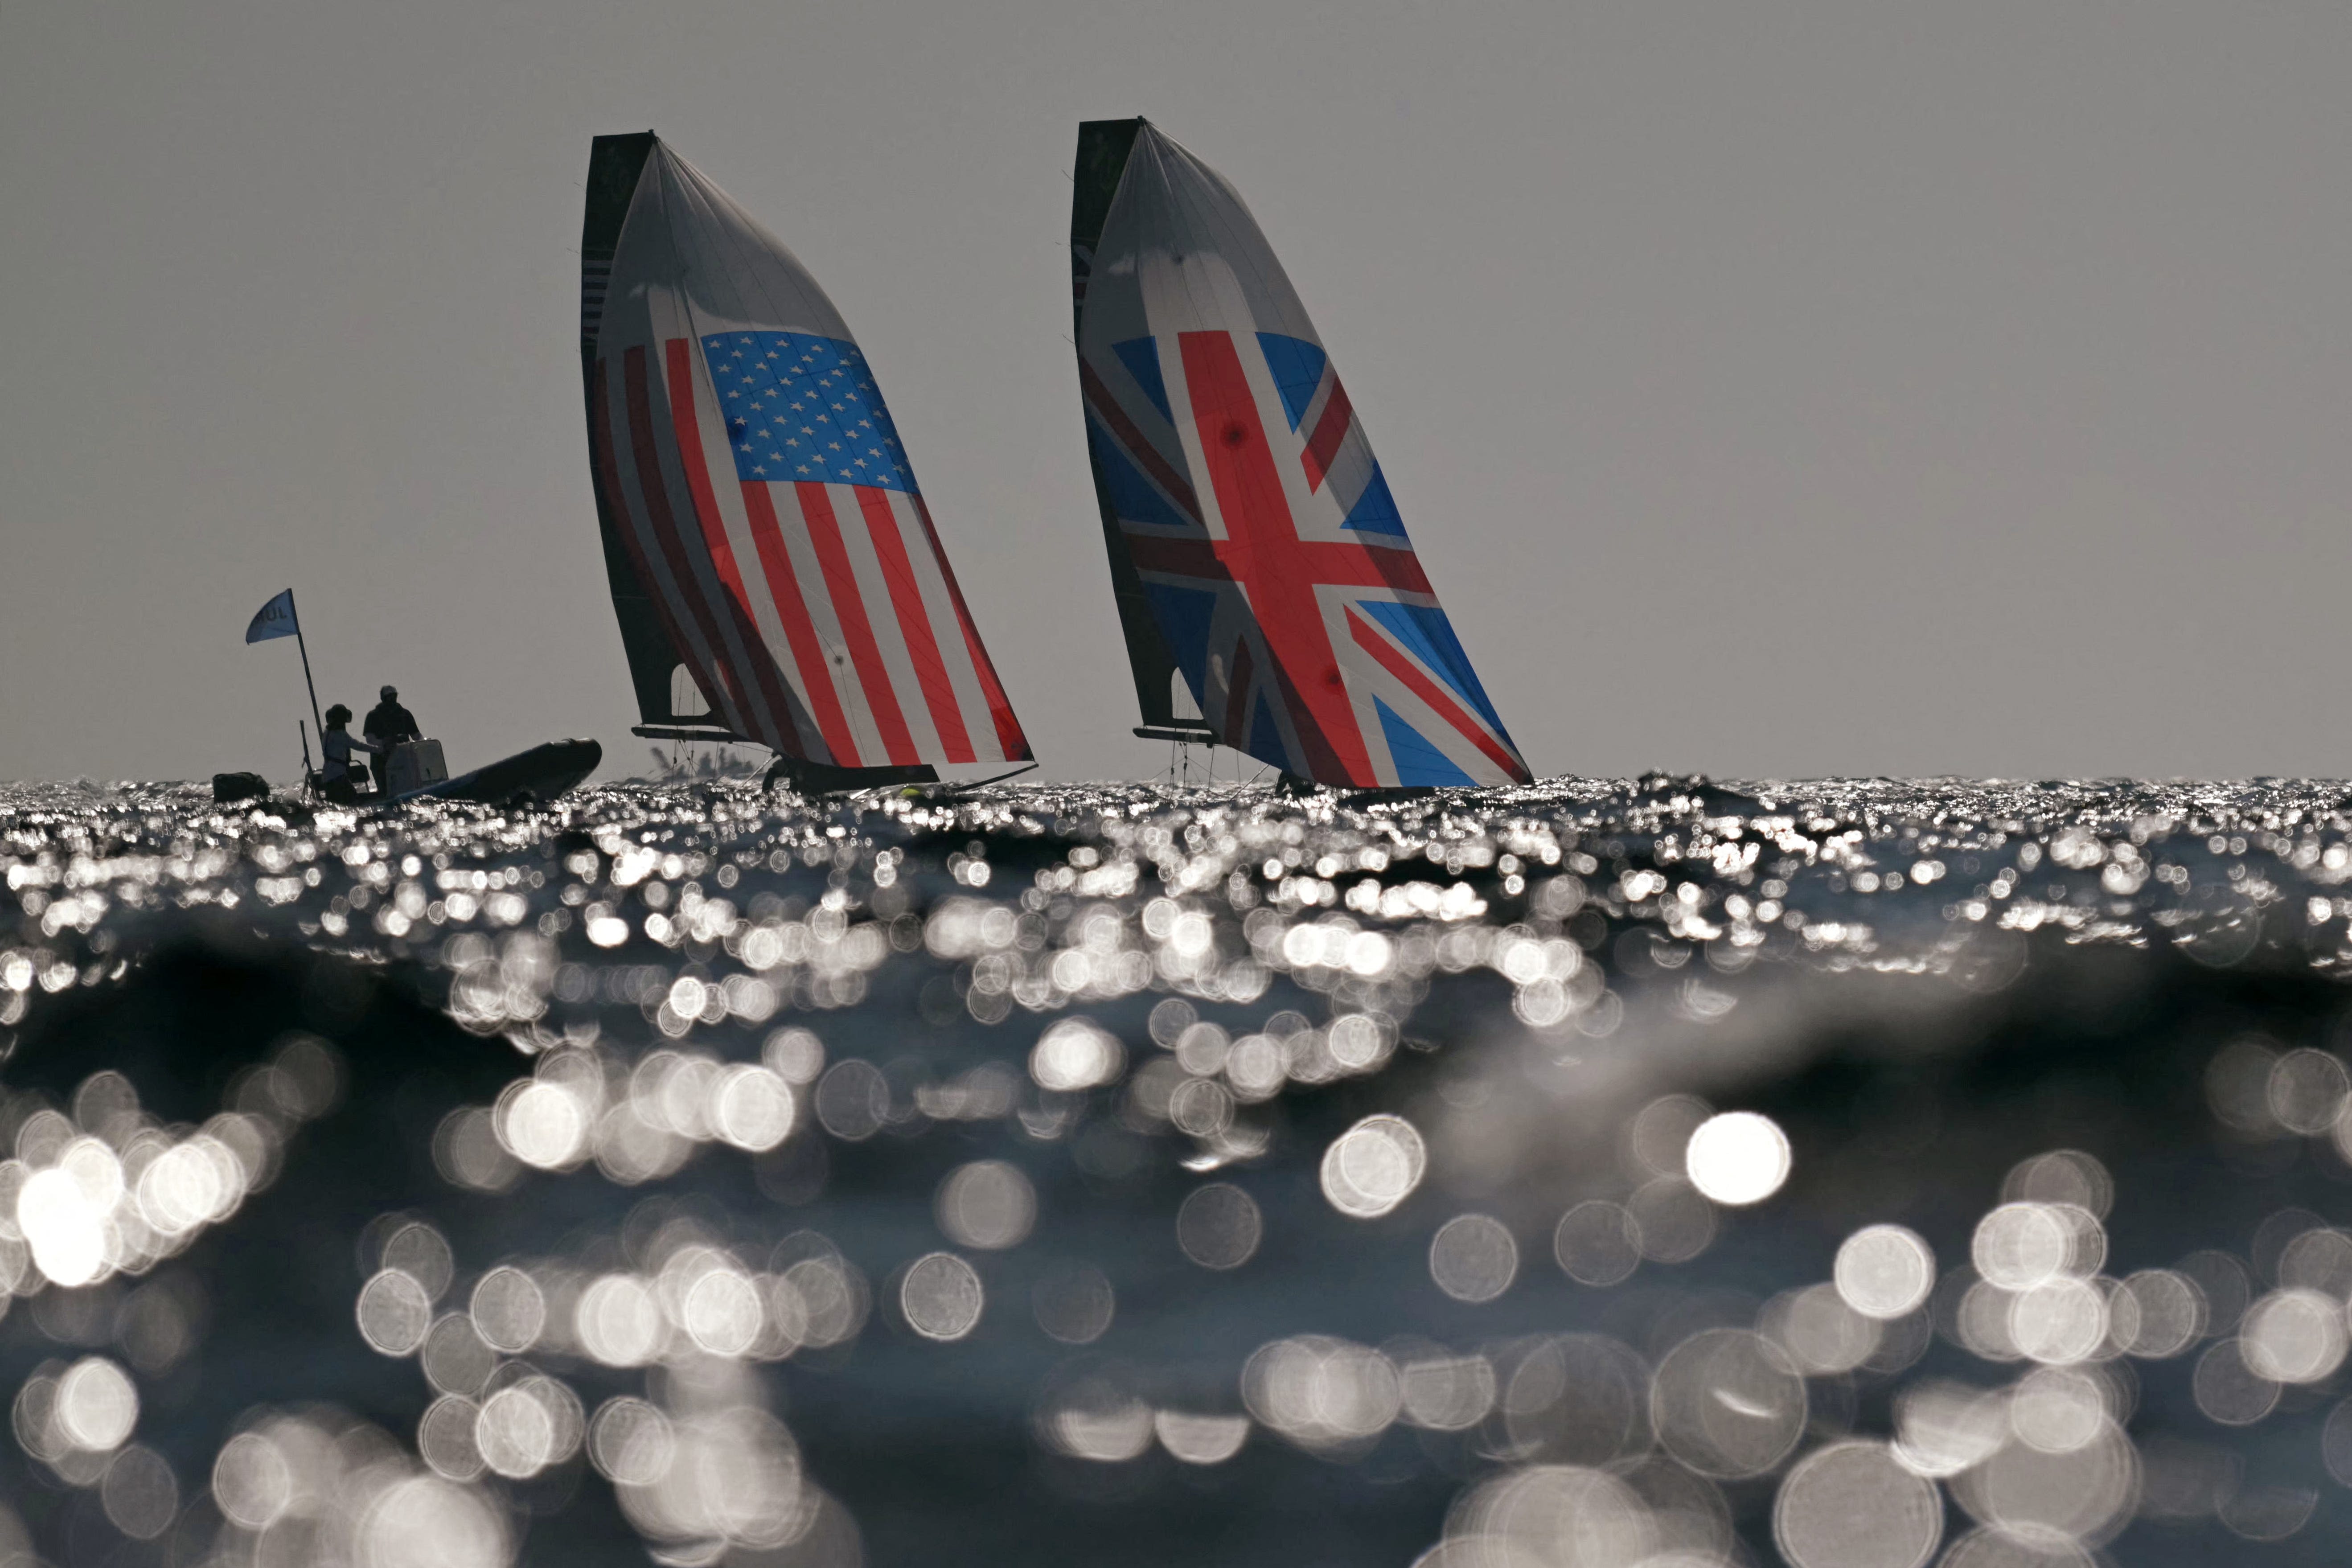 2024 Paris Olympics sailing results: USA gets bronze medal in men's skiff